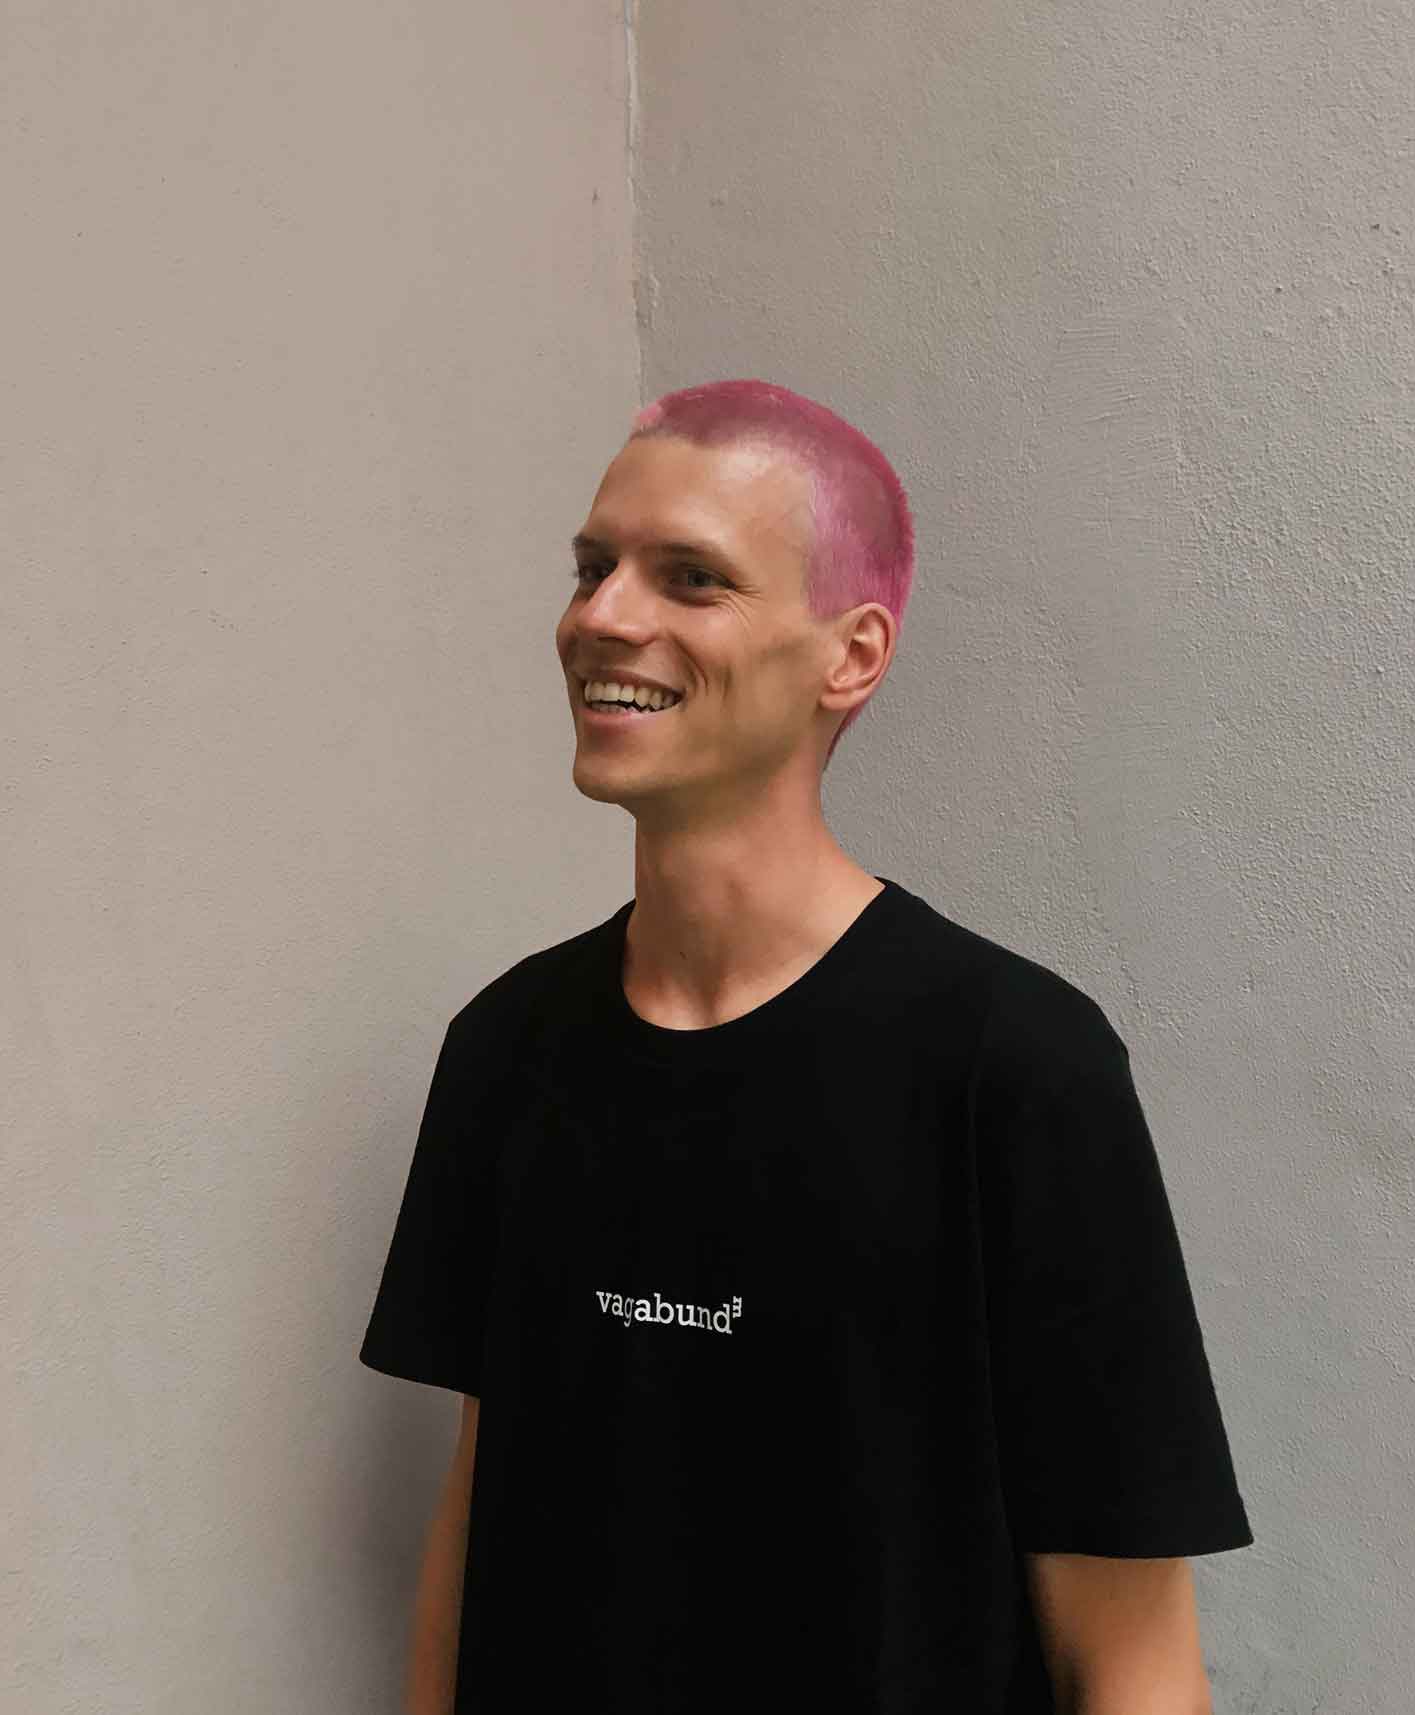 Portrait of Christian Leban with short pastel pink hair wearing a black t-shirt standing in front of a wall.